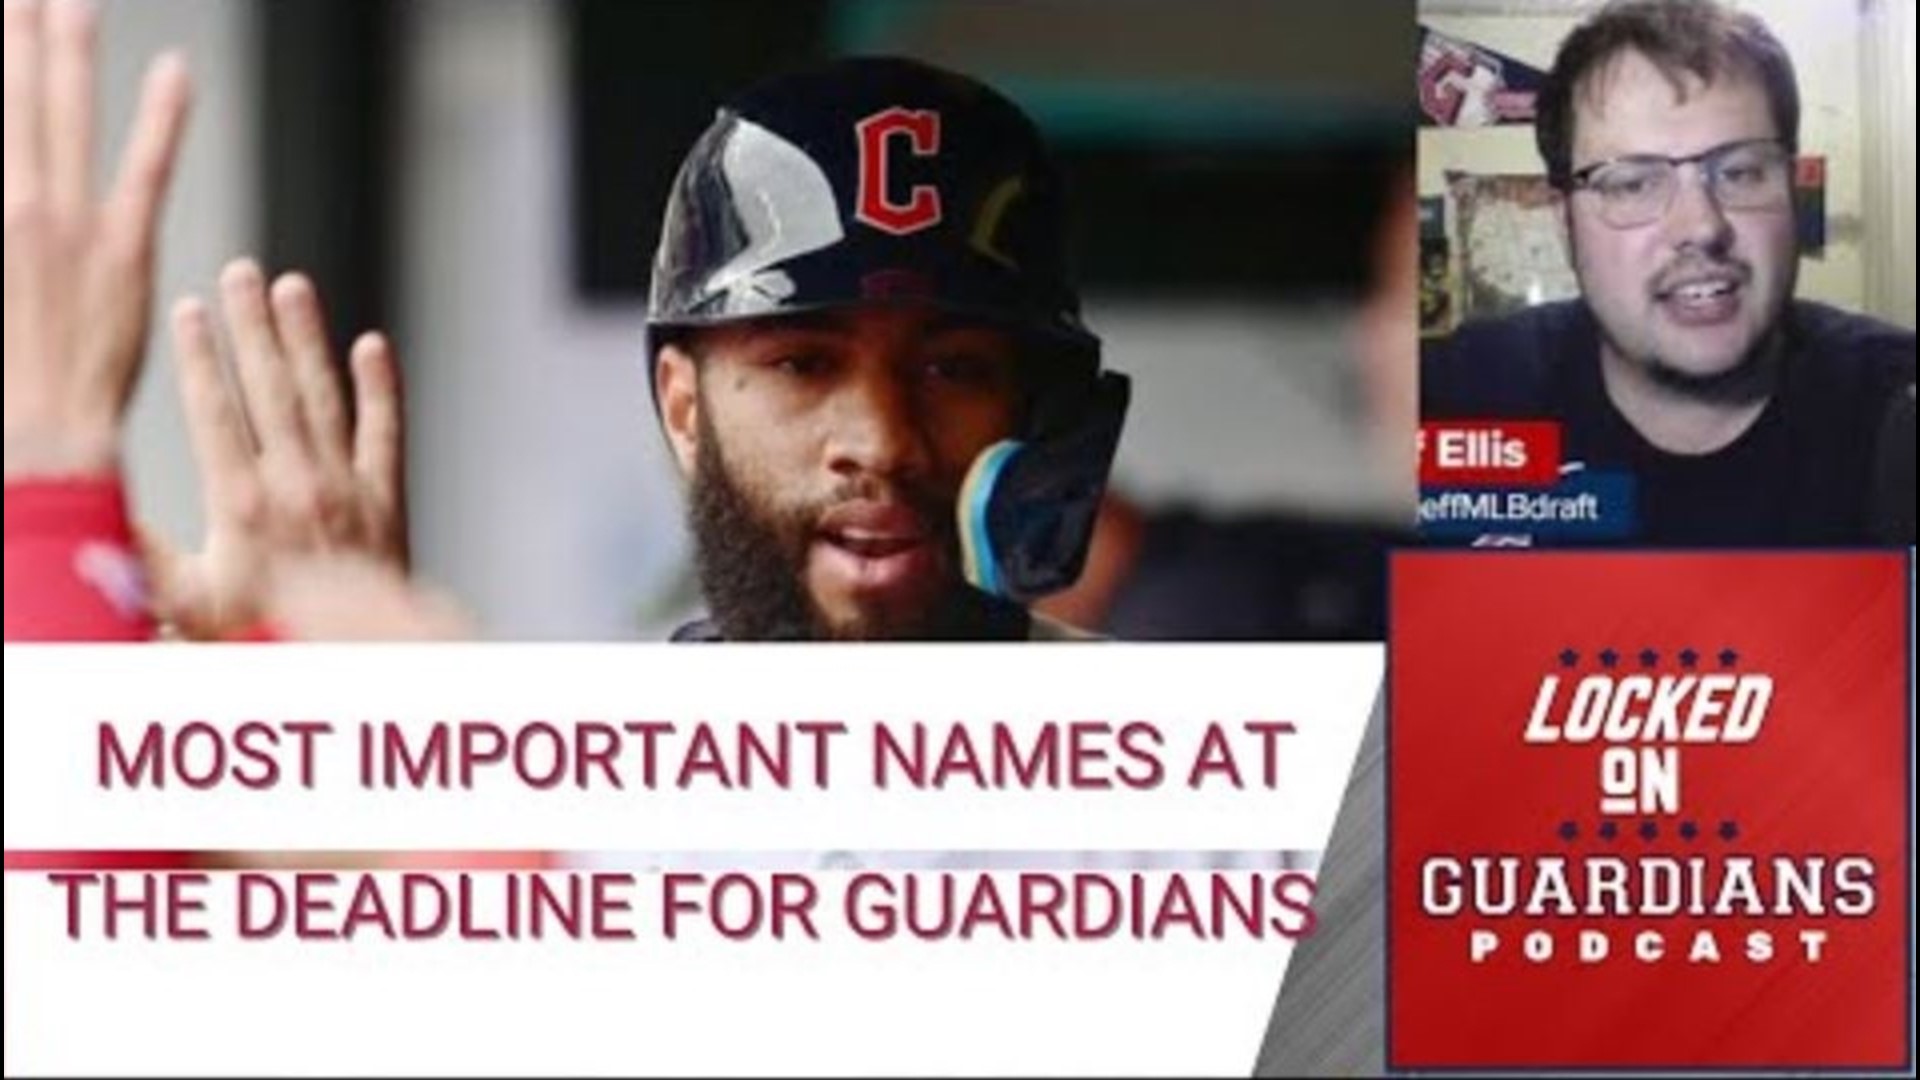 This edition of the Locked On Guardians podcast discusses what’s next for the Cleveland Guardians as the MLB trade deadline approaches.